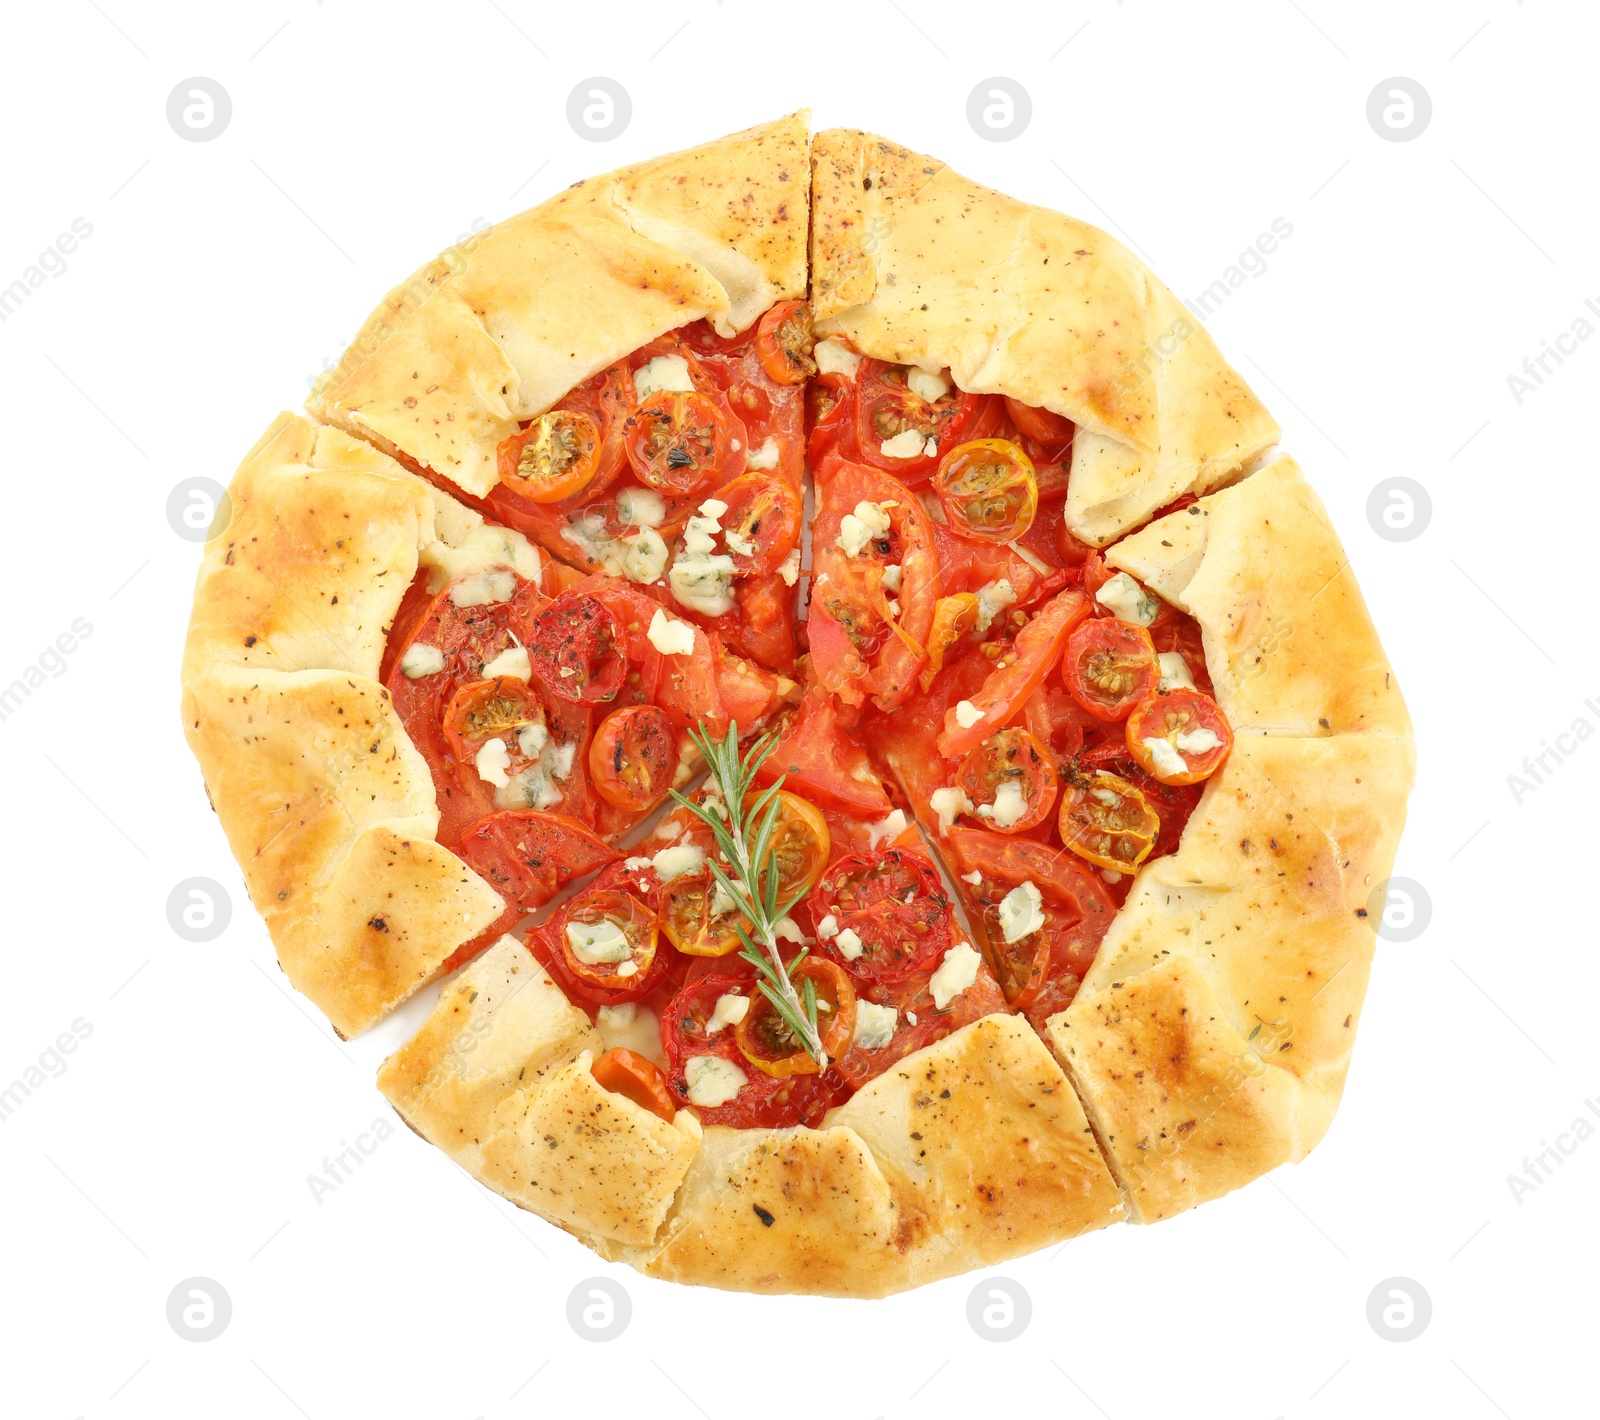 Photo of Tasty galette with tomato, rosemary and cheese (Caprese galette) isolated on white, top view